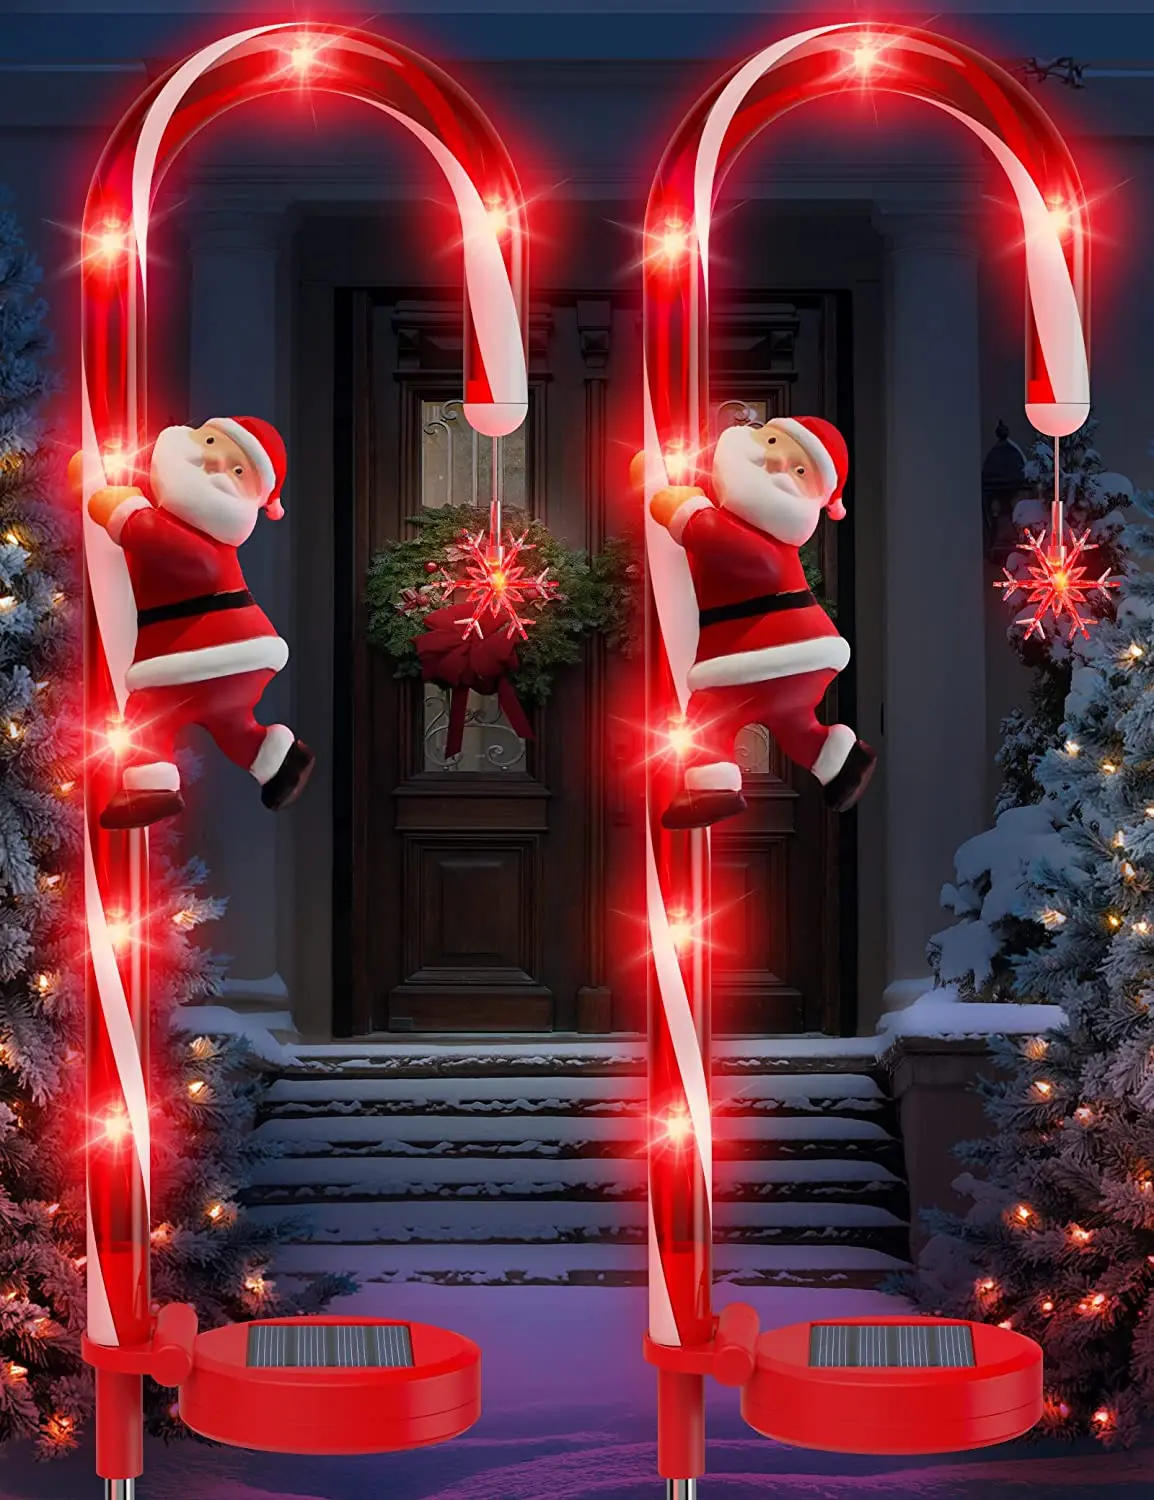 Christmas LED Solar Christmas Decoration Candy Cane Sign Lights Outdoor Stake Lights For Road Garden Lawn Lights Christmas Gifts christmas neon sign gingerbread man bell candy cane led acrylic neon light signs room decor for winter home holiday decoration